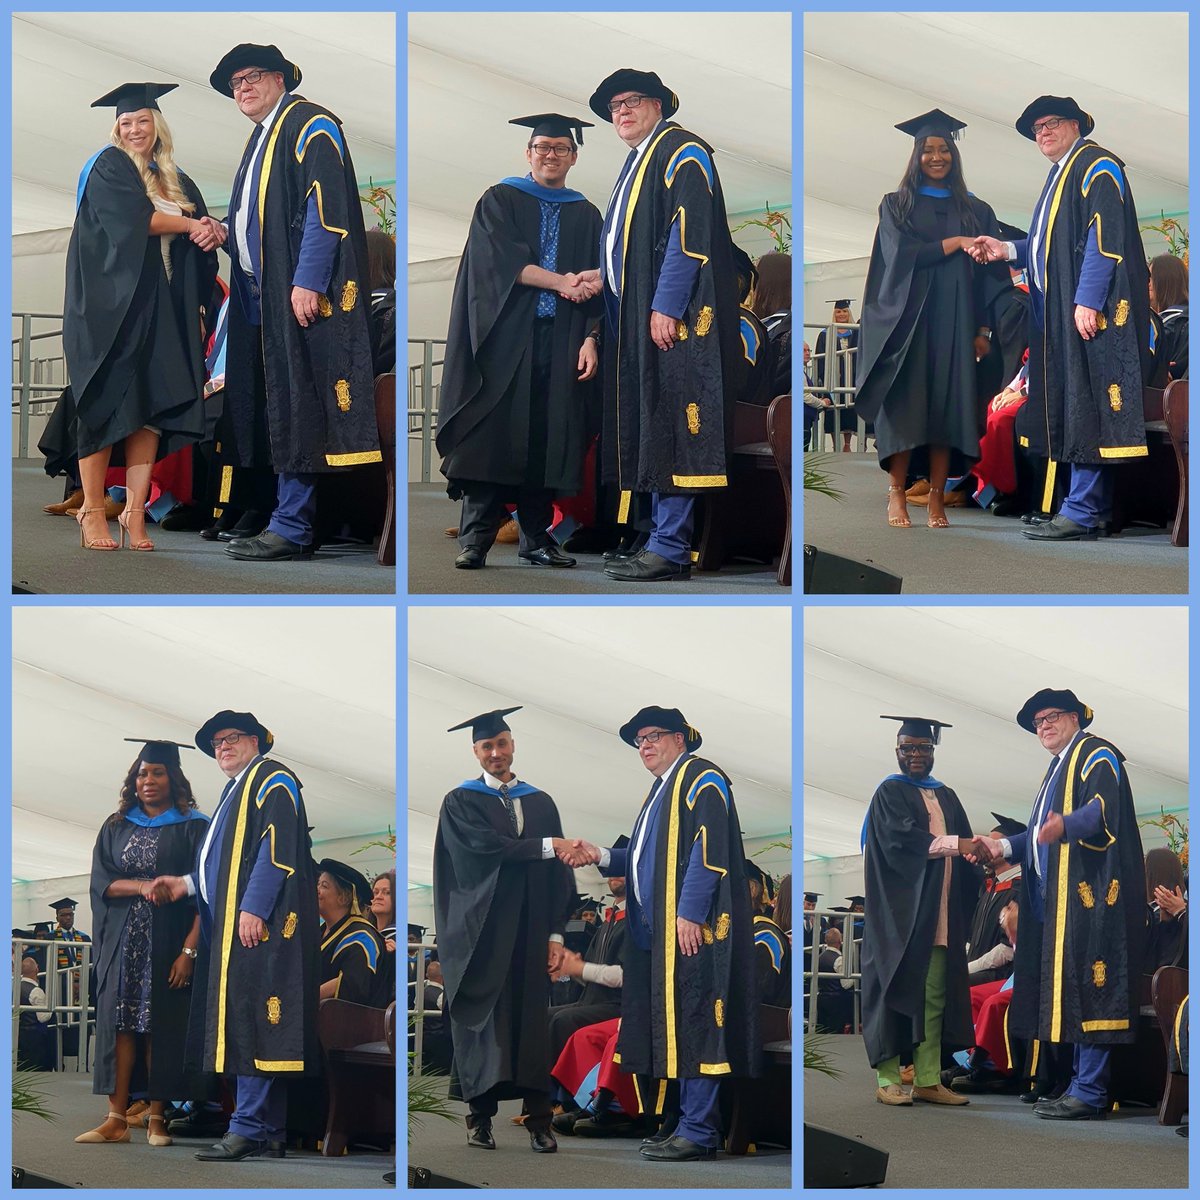 Just a couple of the many pictures taken so far today from the 1pm ceremony #UONGrads. What a great atmosphere in celebration of these amazing nurses and cohort of #Aspire students 👏 #partnership @StAndrewsCare @UniNhantsFHES @UniNorthants @UniNhantsNurse